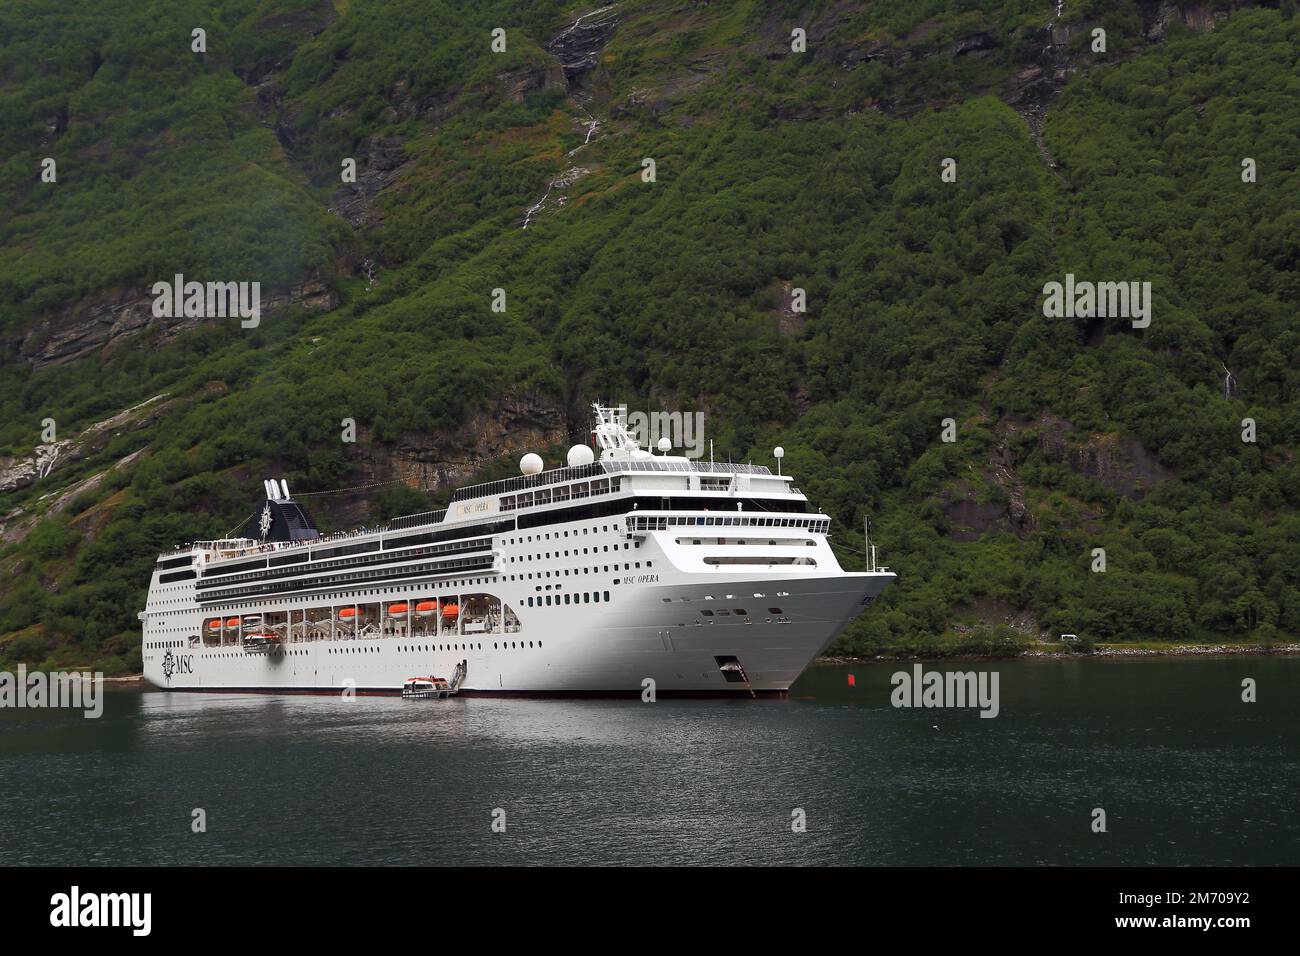 GEIRANGER, NORWAY - JULY 6, 2016: The liner MSC Opera is at anchor in Geiranger Fjord near the town of Geiranger. Stock Photo